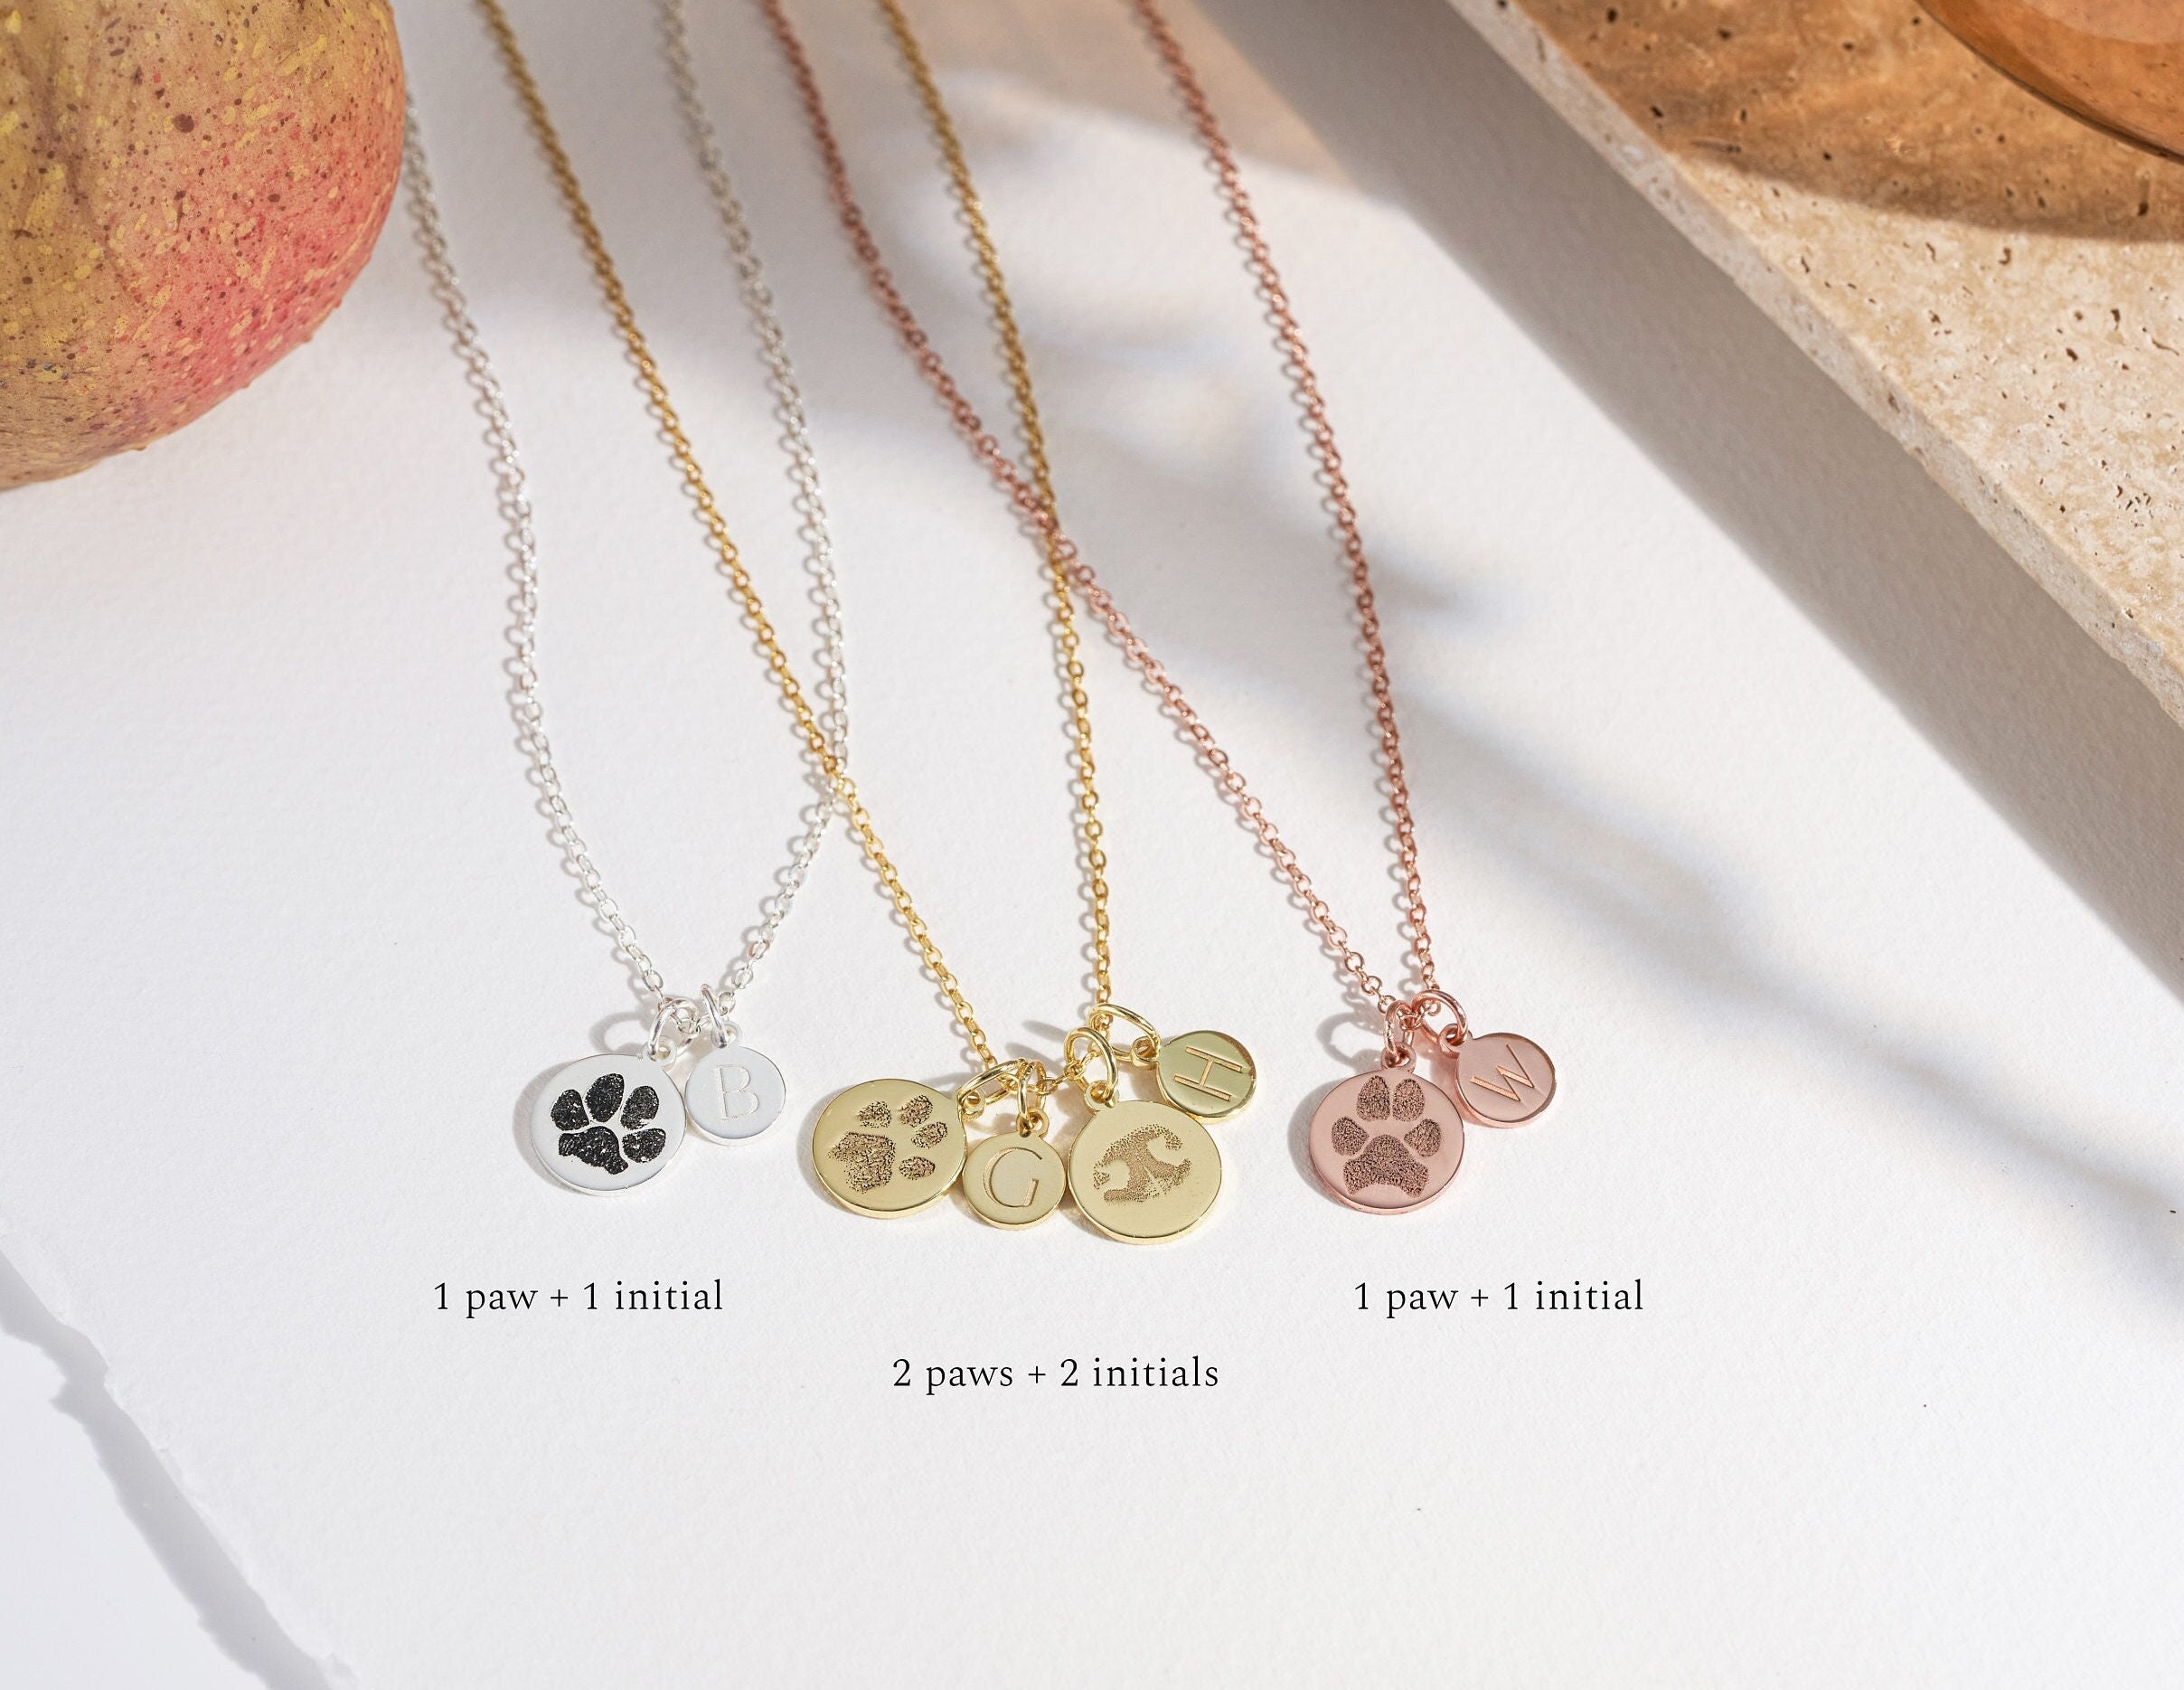 Chanel Button Necklaces/ Save your money/ You can do this yourself